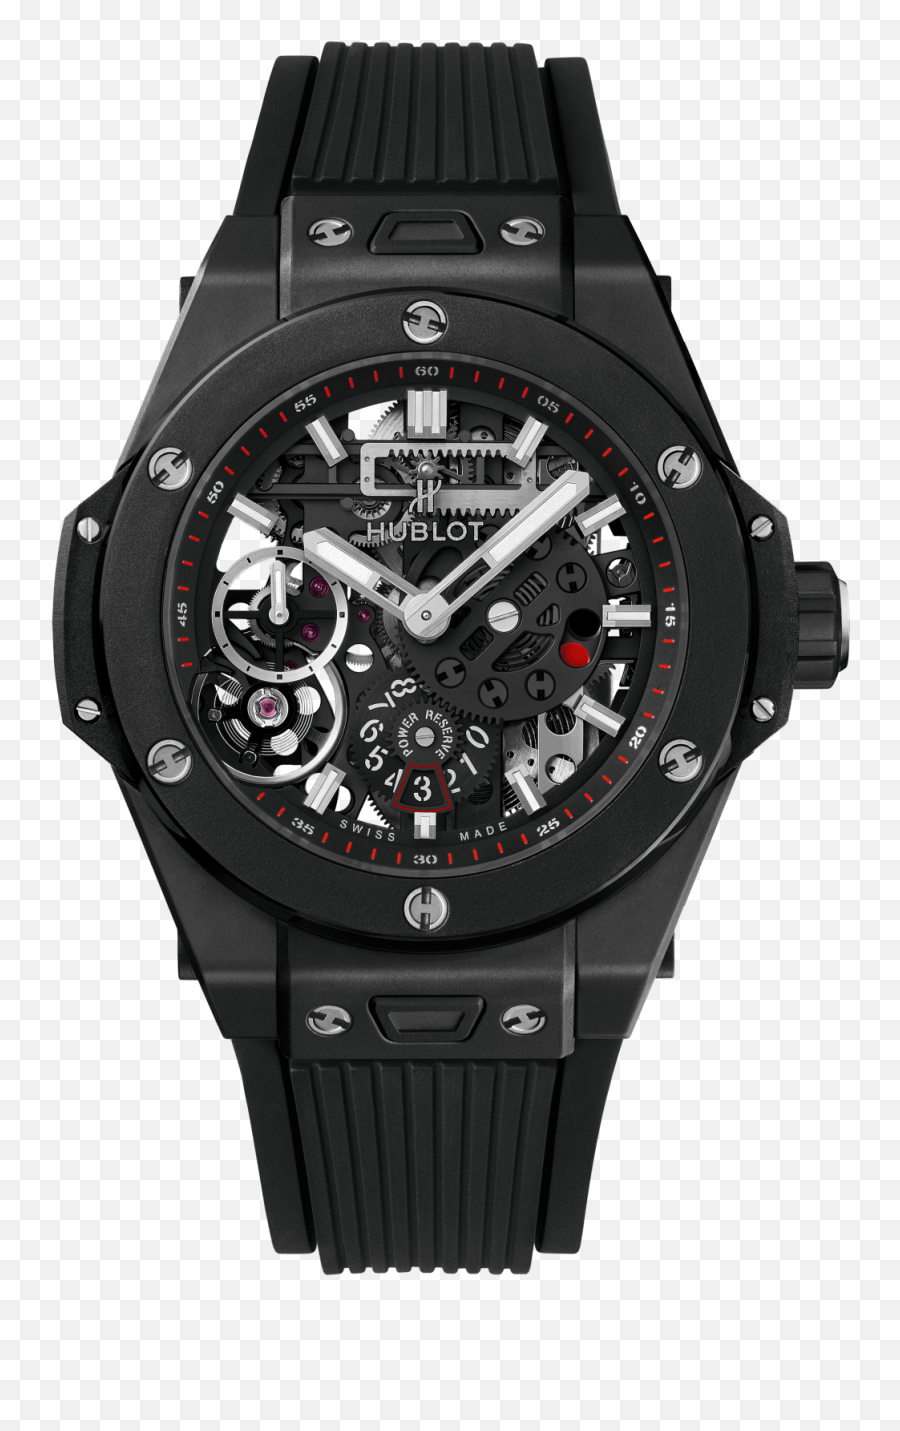 Watch Spotting Hublot Iwc And Richard Mille In Drive To Emoji,Azone Pure Neemo 2 Emotion Large Bust